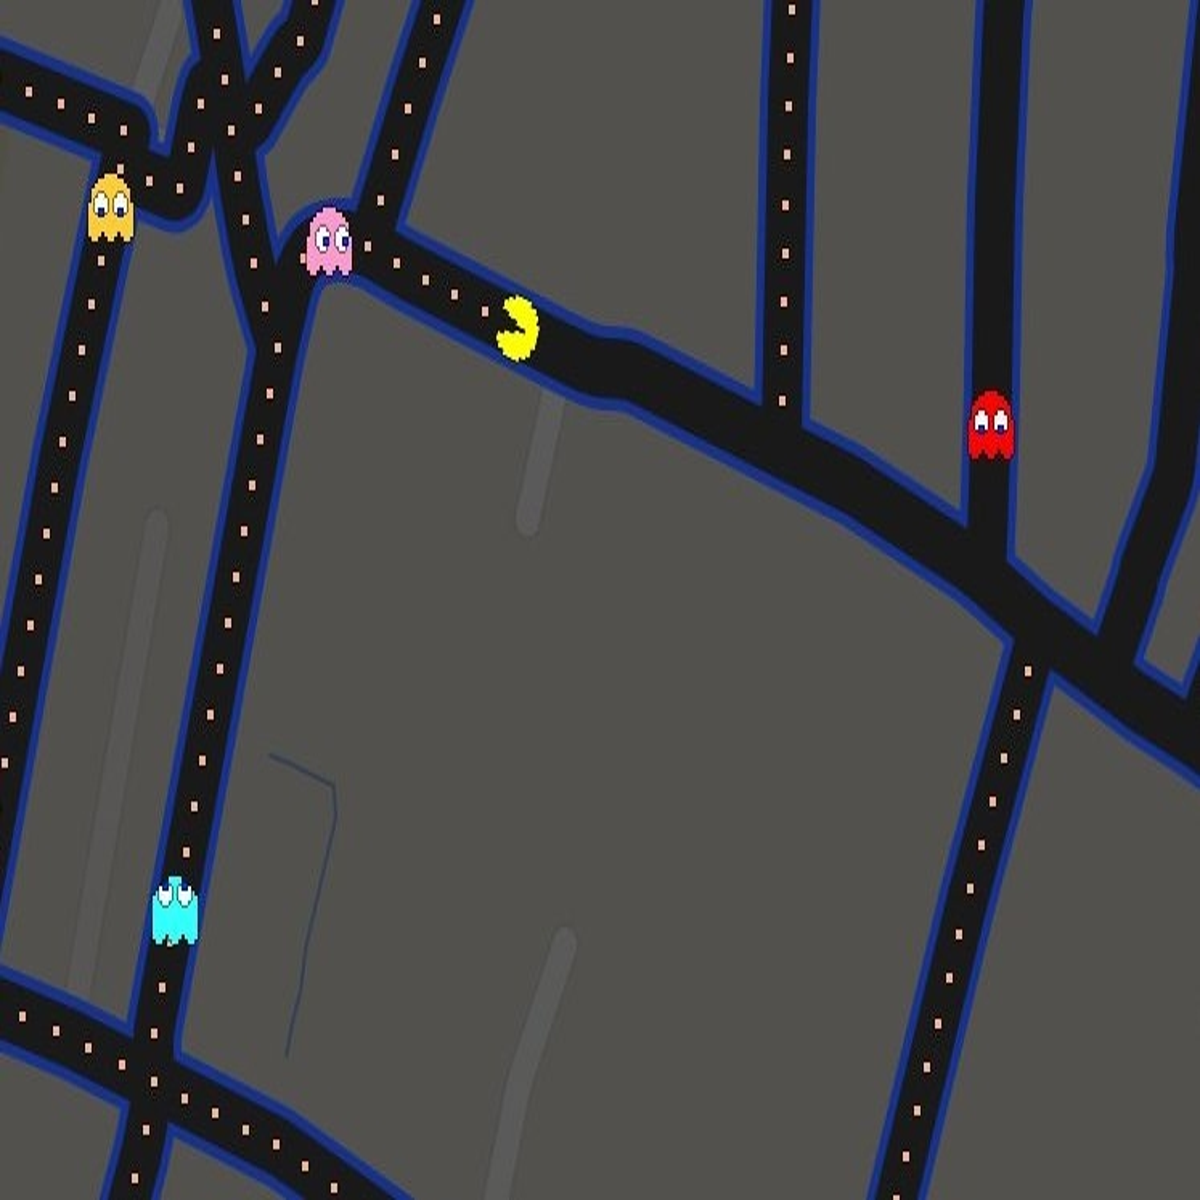 You've Got To Try The Pac-Man Google Maps Game - Creative Market Blog